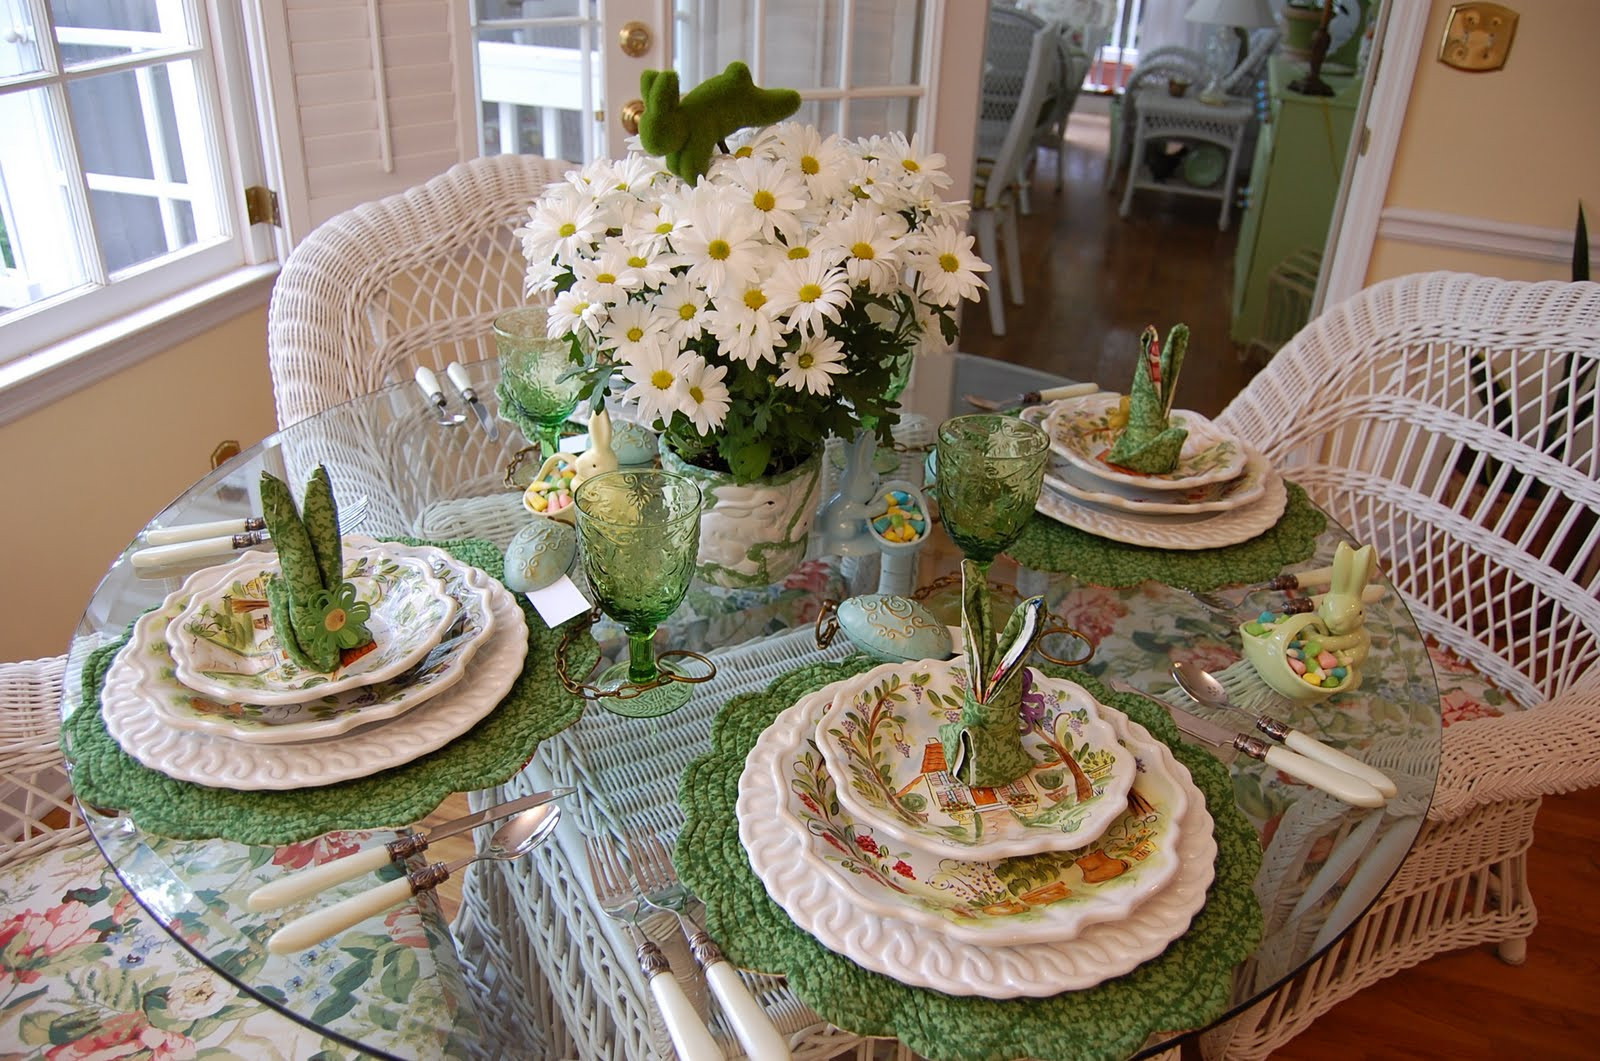 Easter Dinner Table Settings
 Easter Table Setting Tablescape with Floral Centerpiece